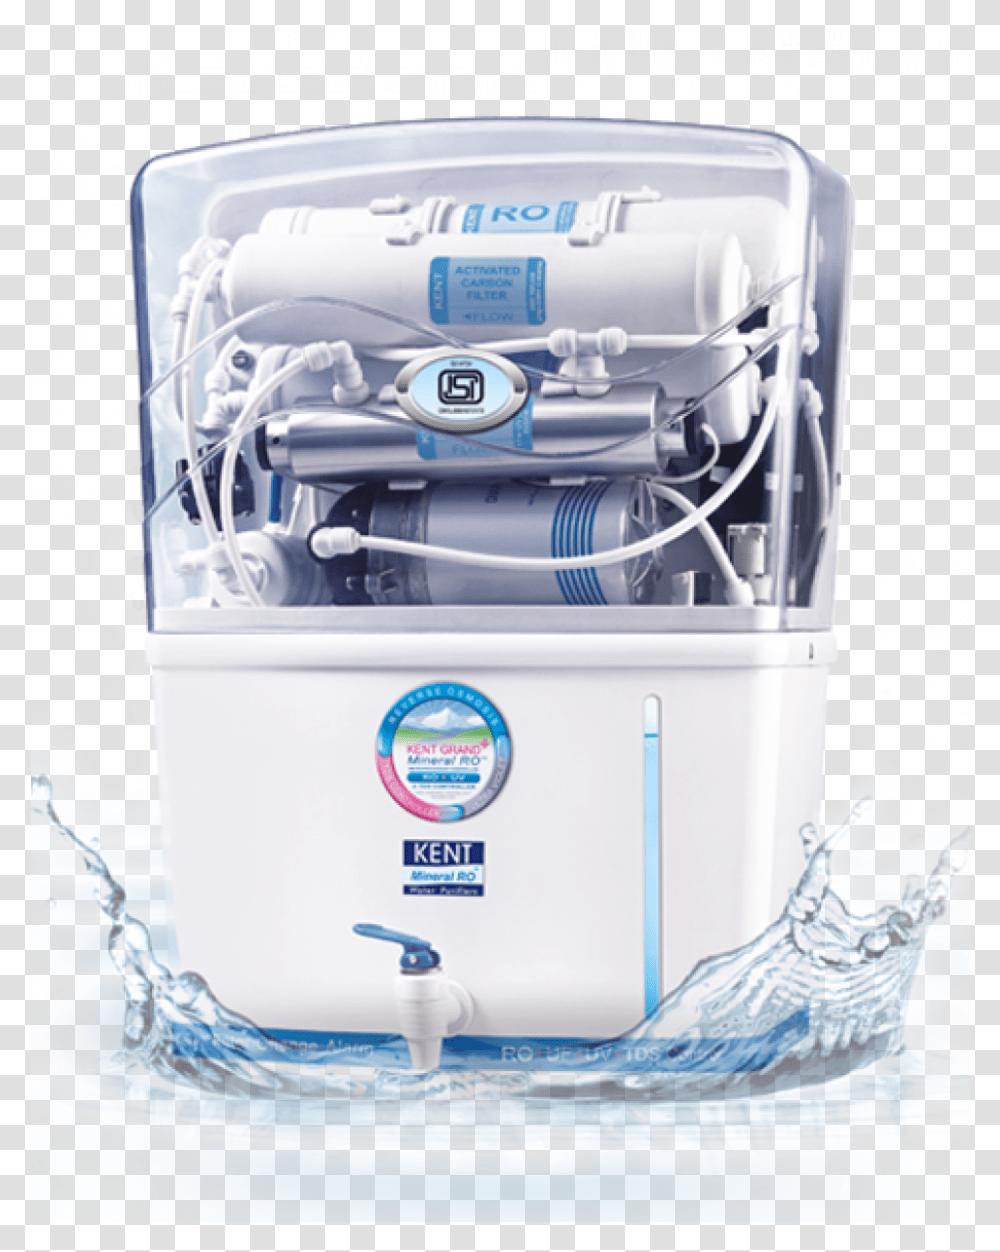 Kent Grand Plus Mineral Ro Uv Uf With Tds Controller Kent Ro Uv Water Purifier, Appliance, Cooler, Dishwasher, Mixer Transparent Png